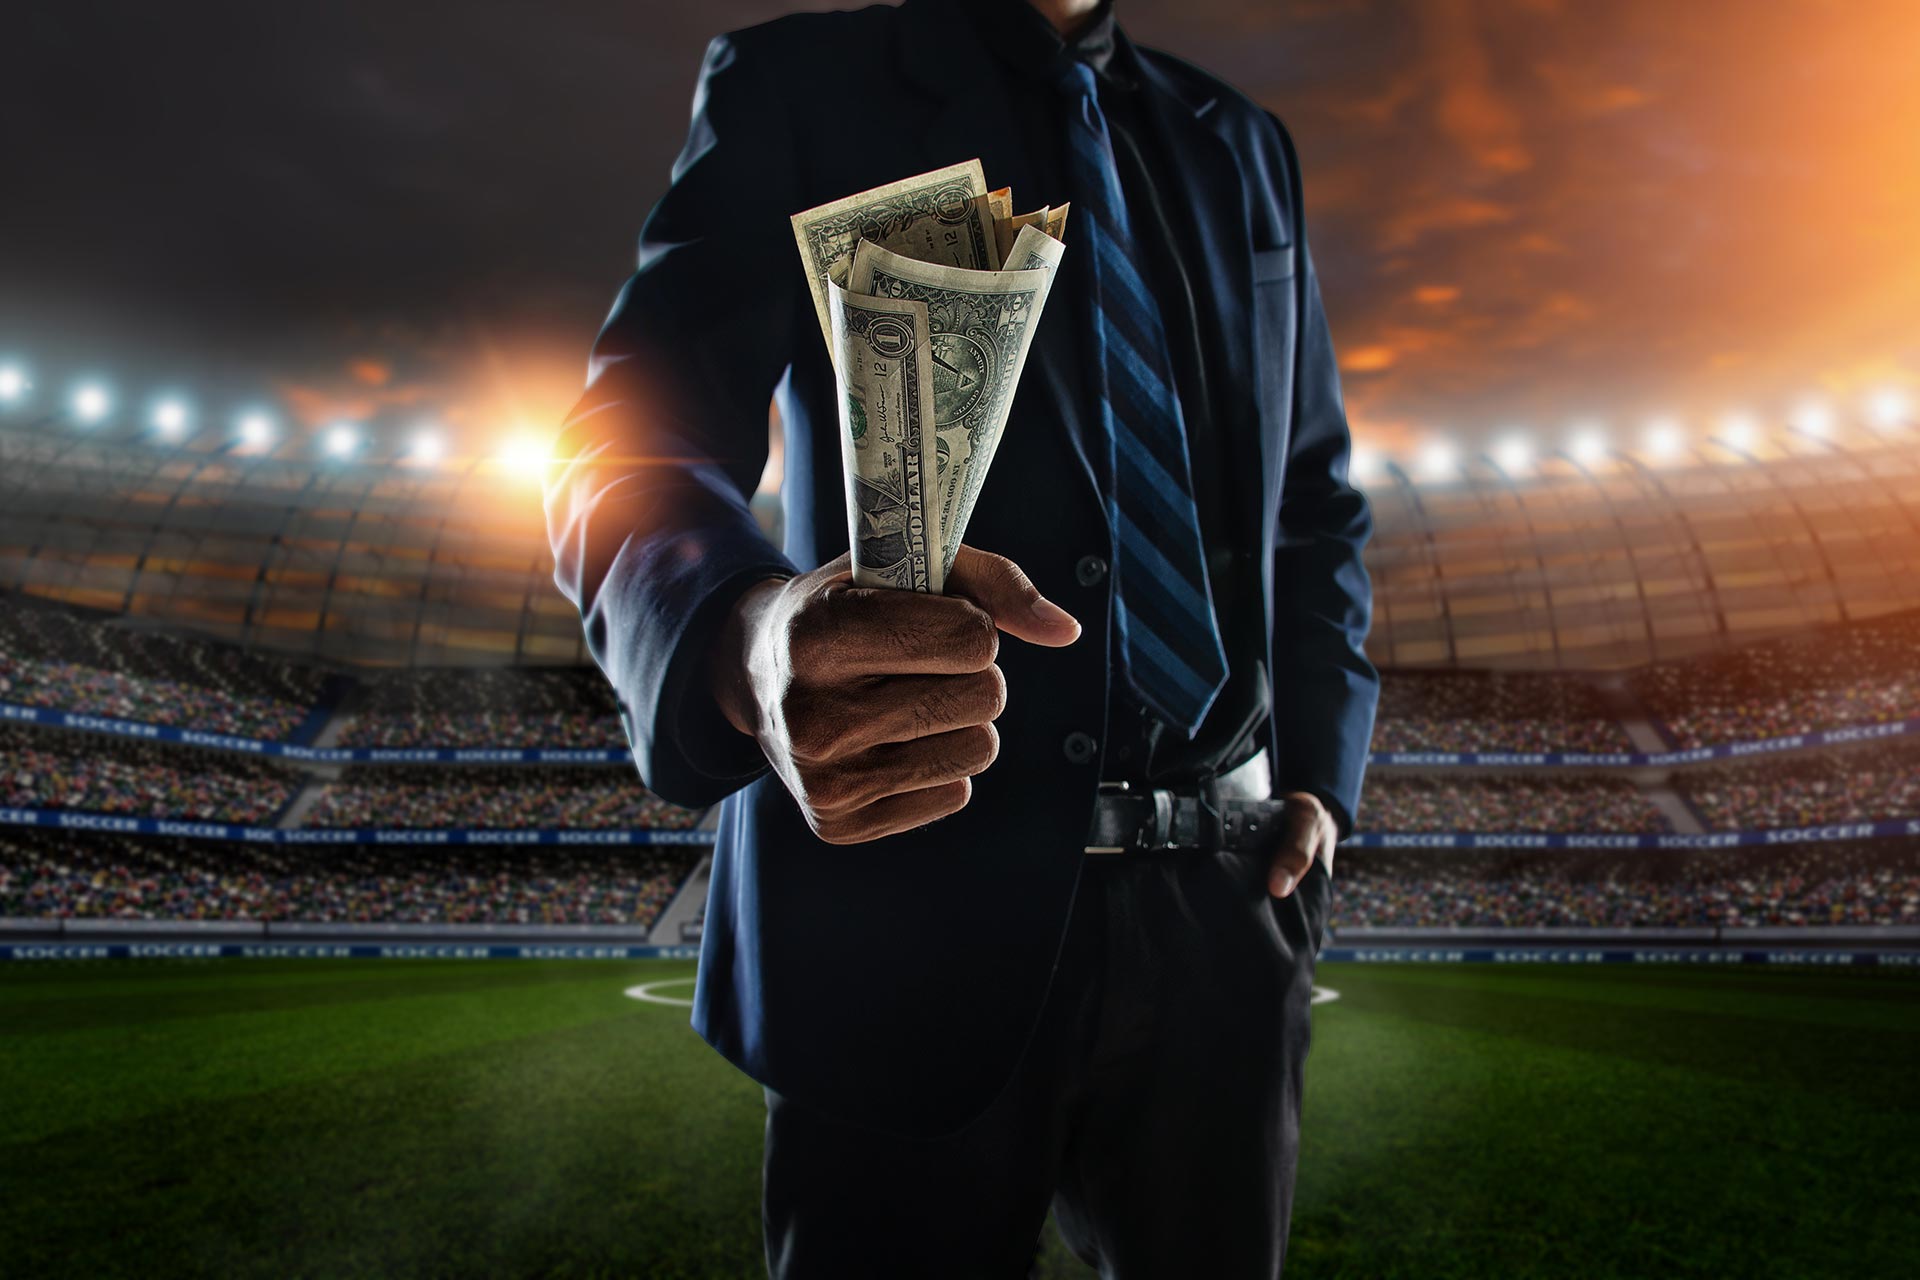 Legal football betting real estate investing school